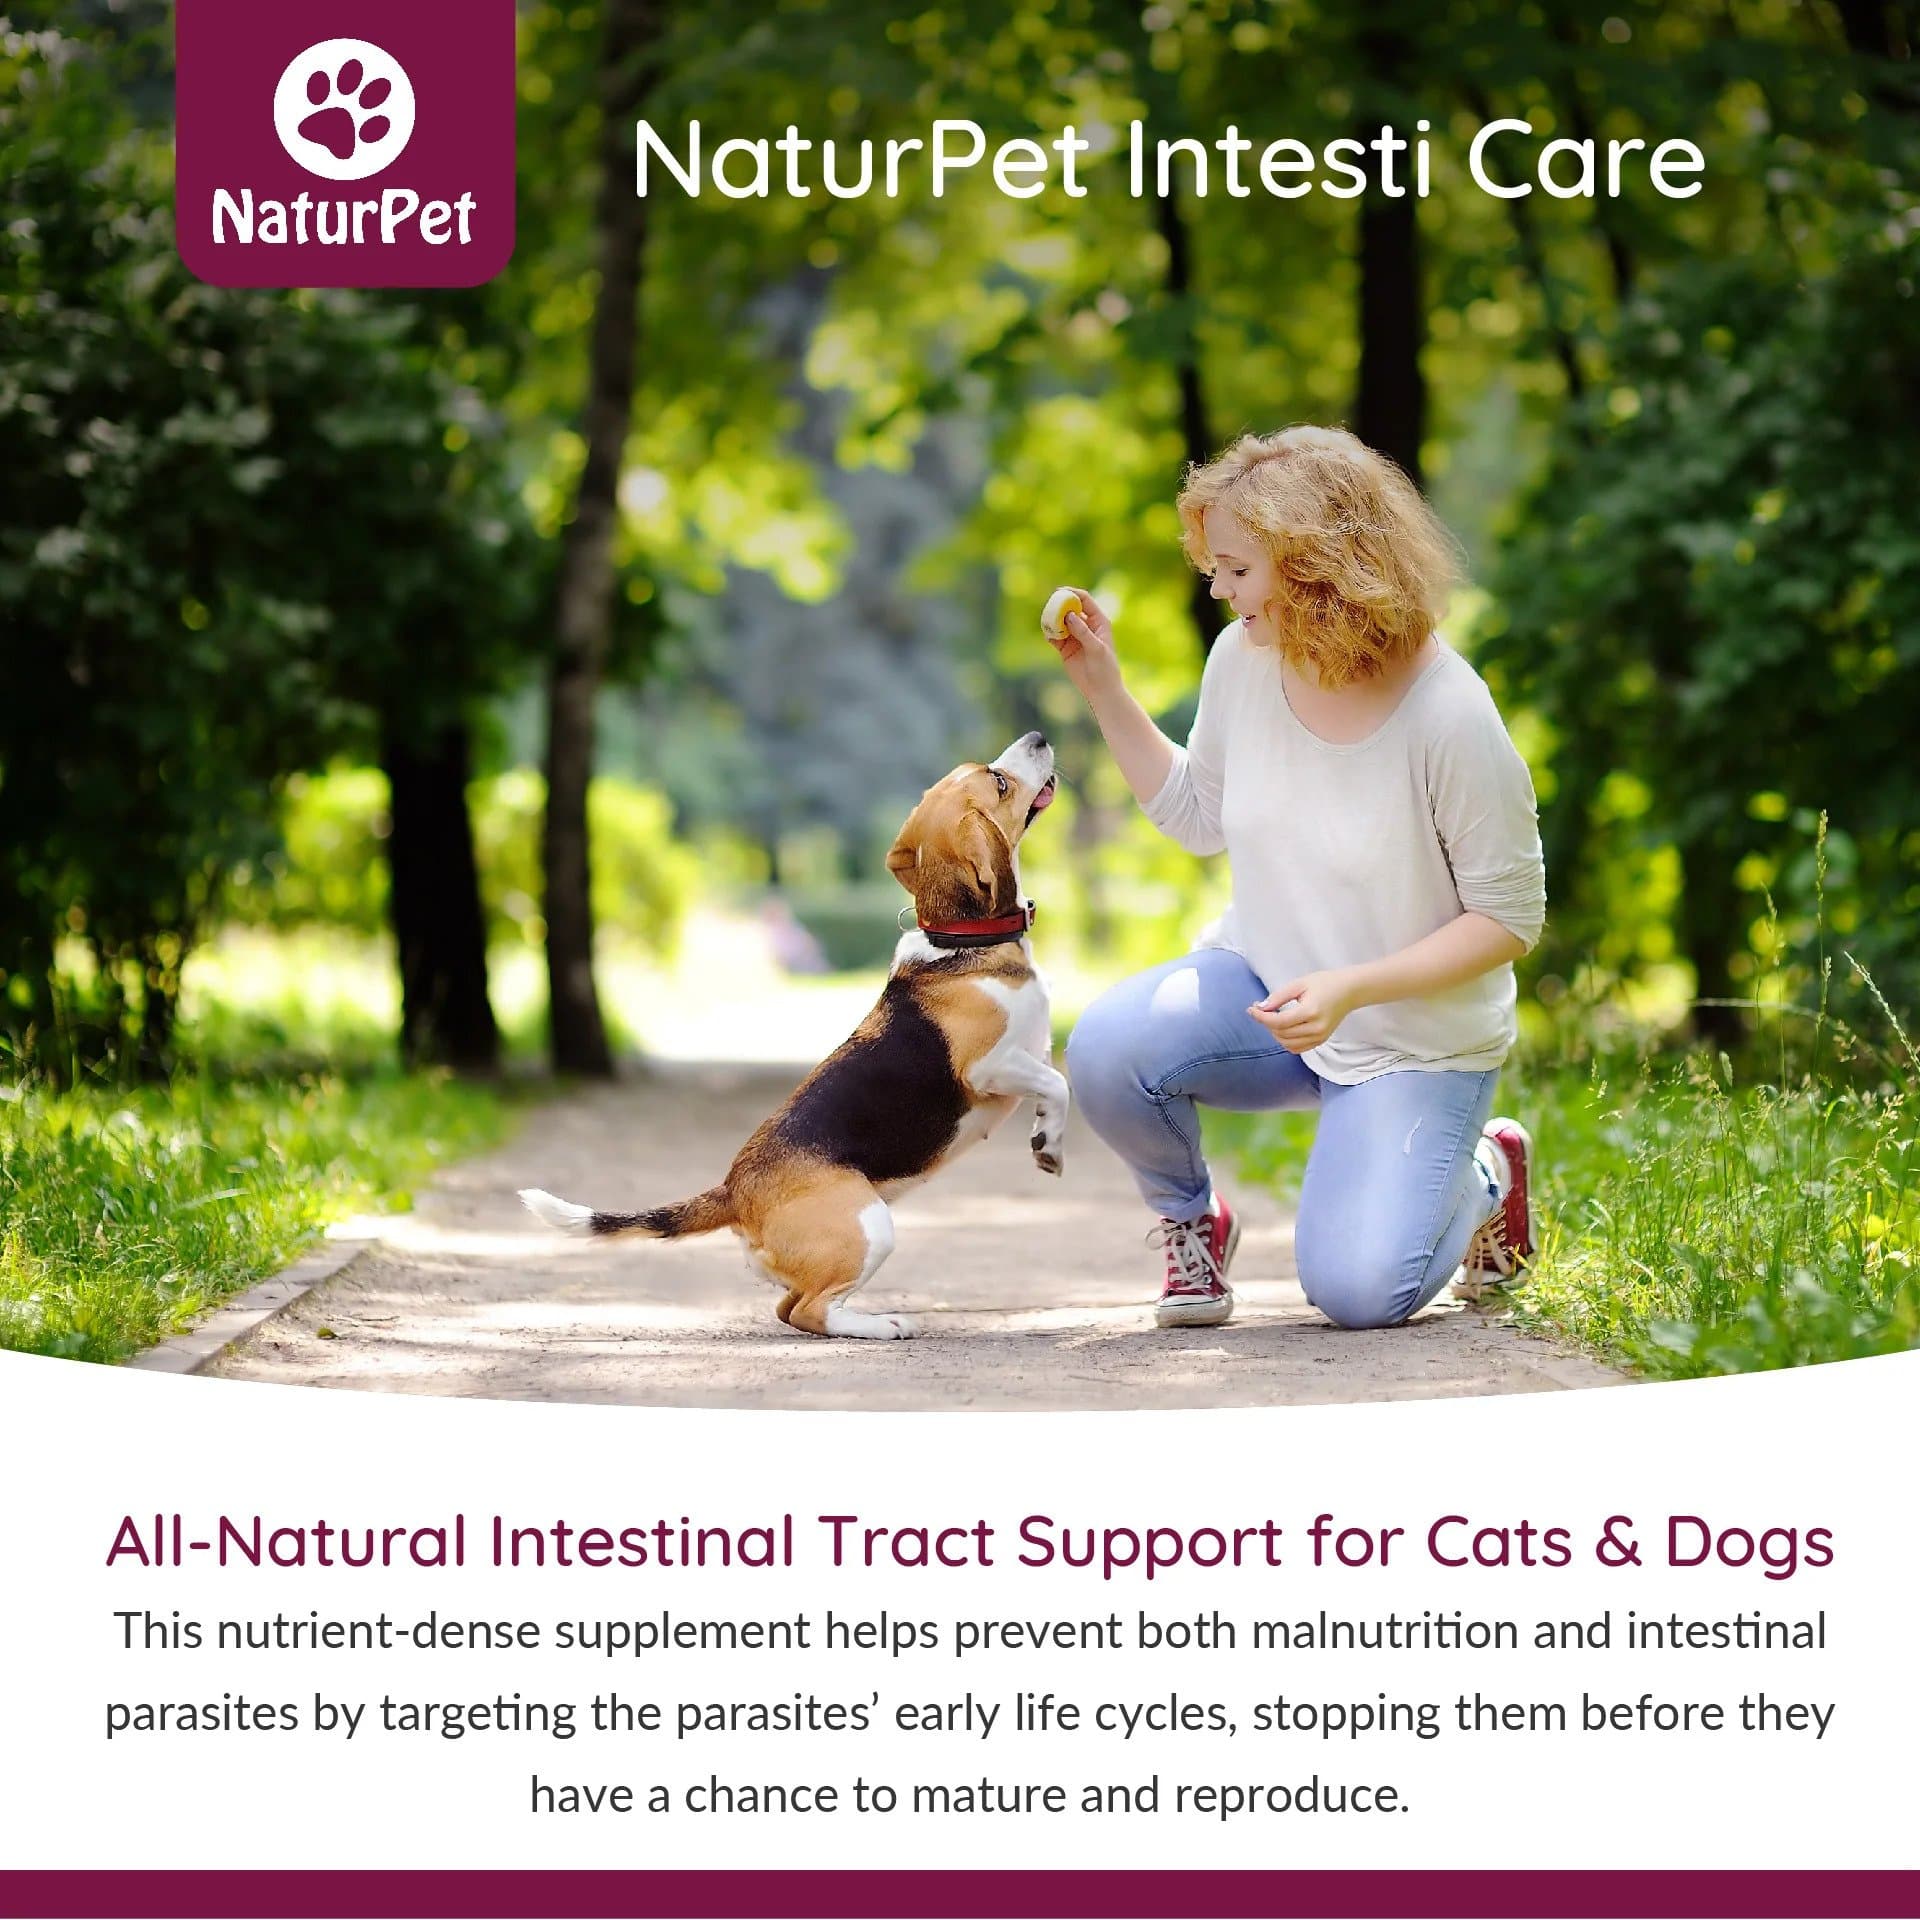 Support for cats and dogs